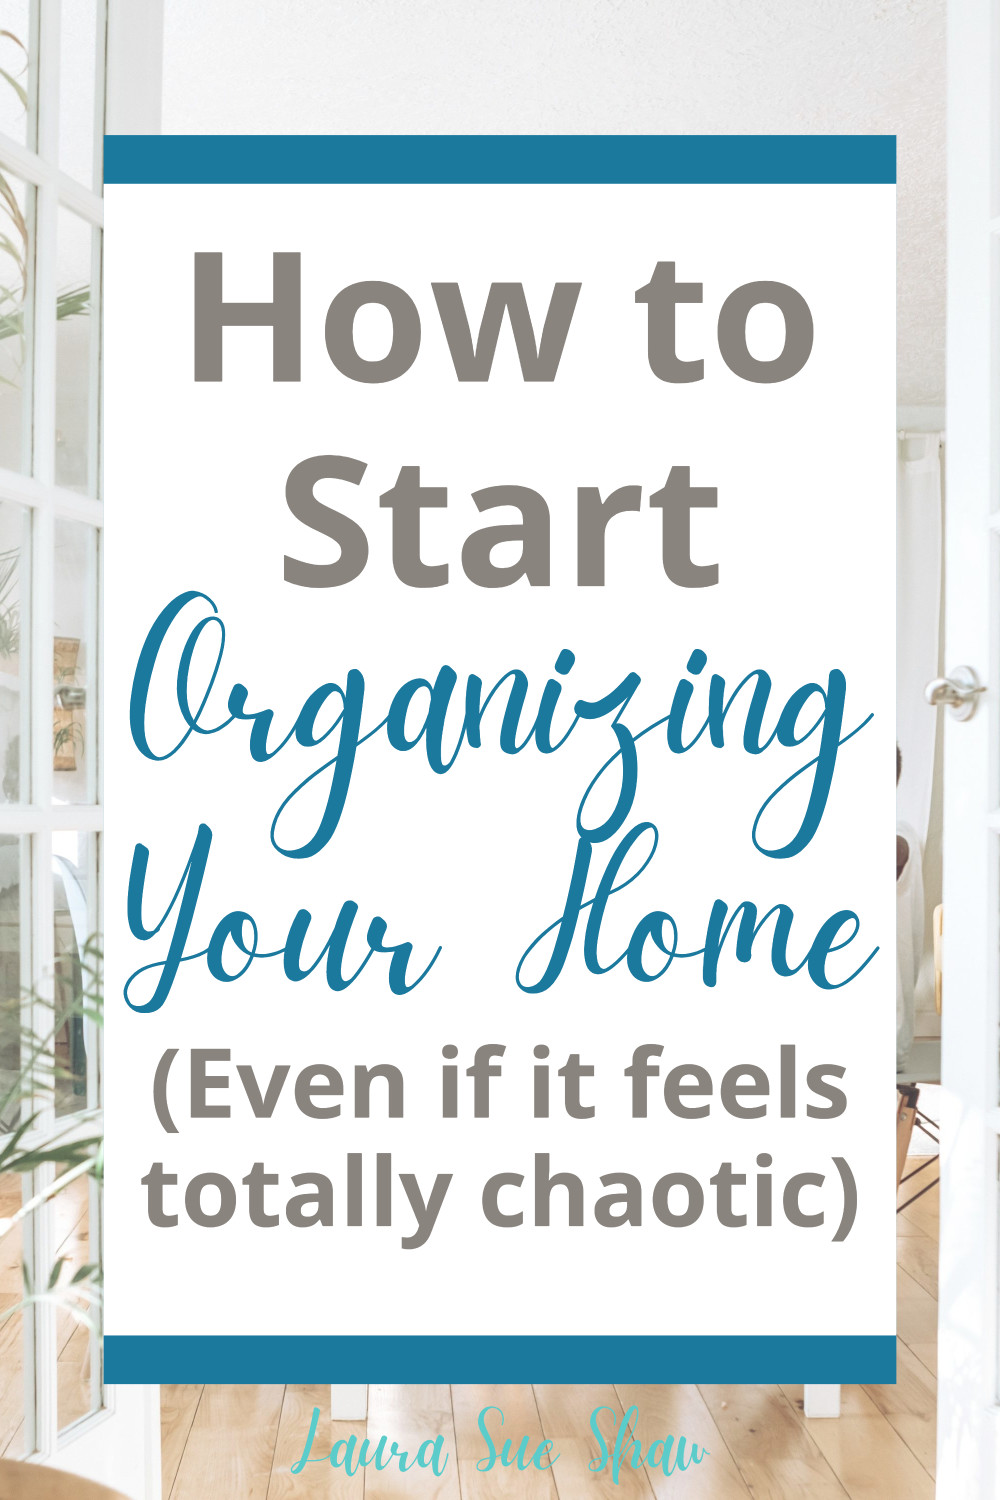 If your home feels chaotic, here's a plan to help you get started organizing your home so it feels like a haven.